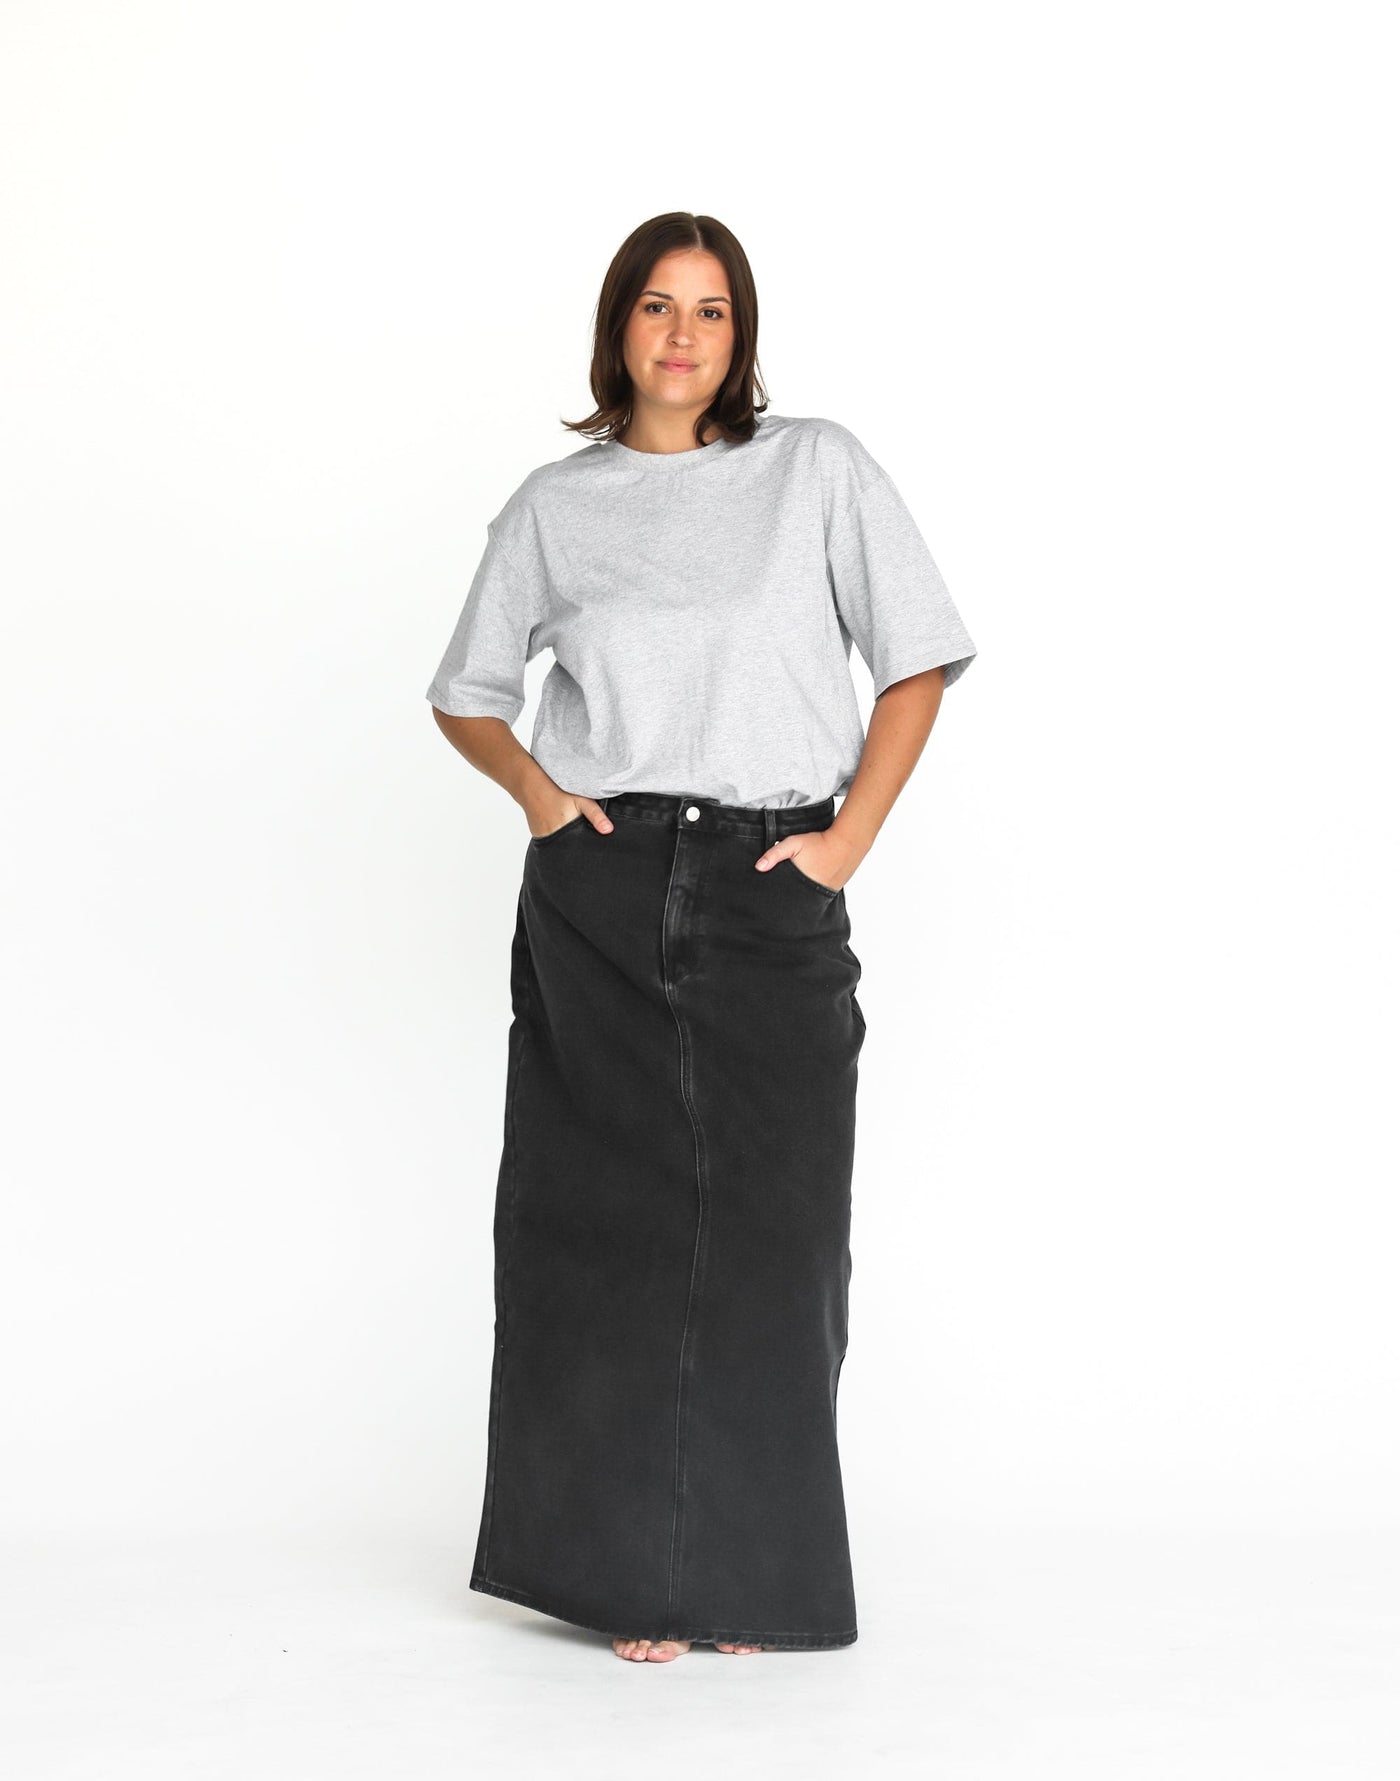 Tyler Denim Maxi Skirt (Vintage Black) | CHARCOAL Exclusive - Low to High Rise Centre Back Split Maxi Skirt - Women's Skirt - Charcoal Clothing